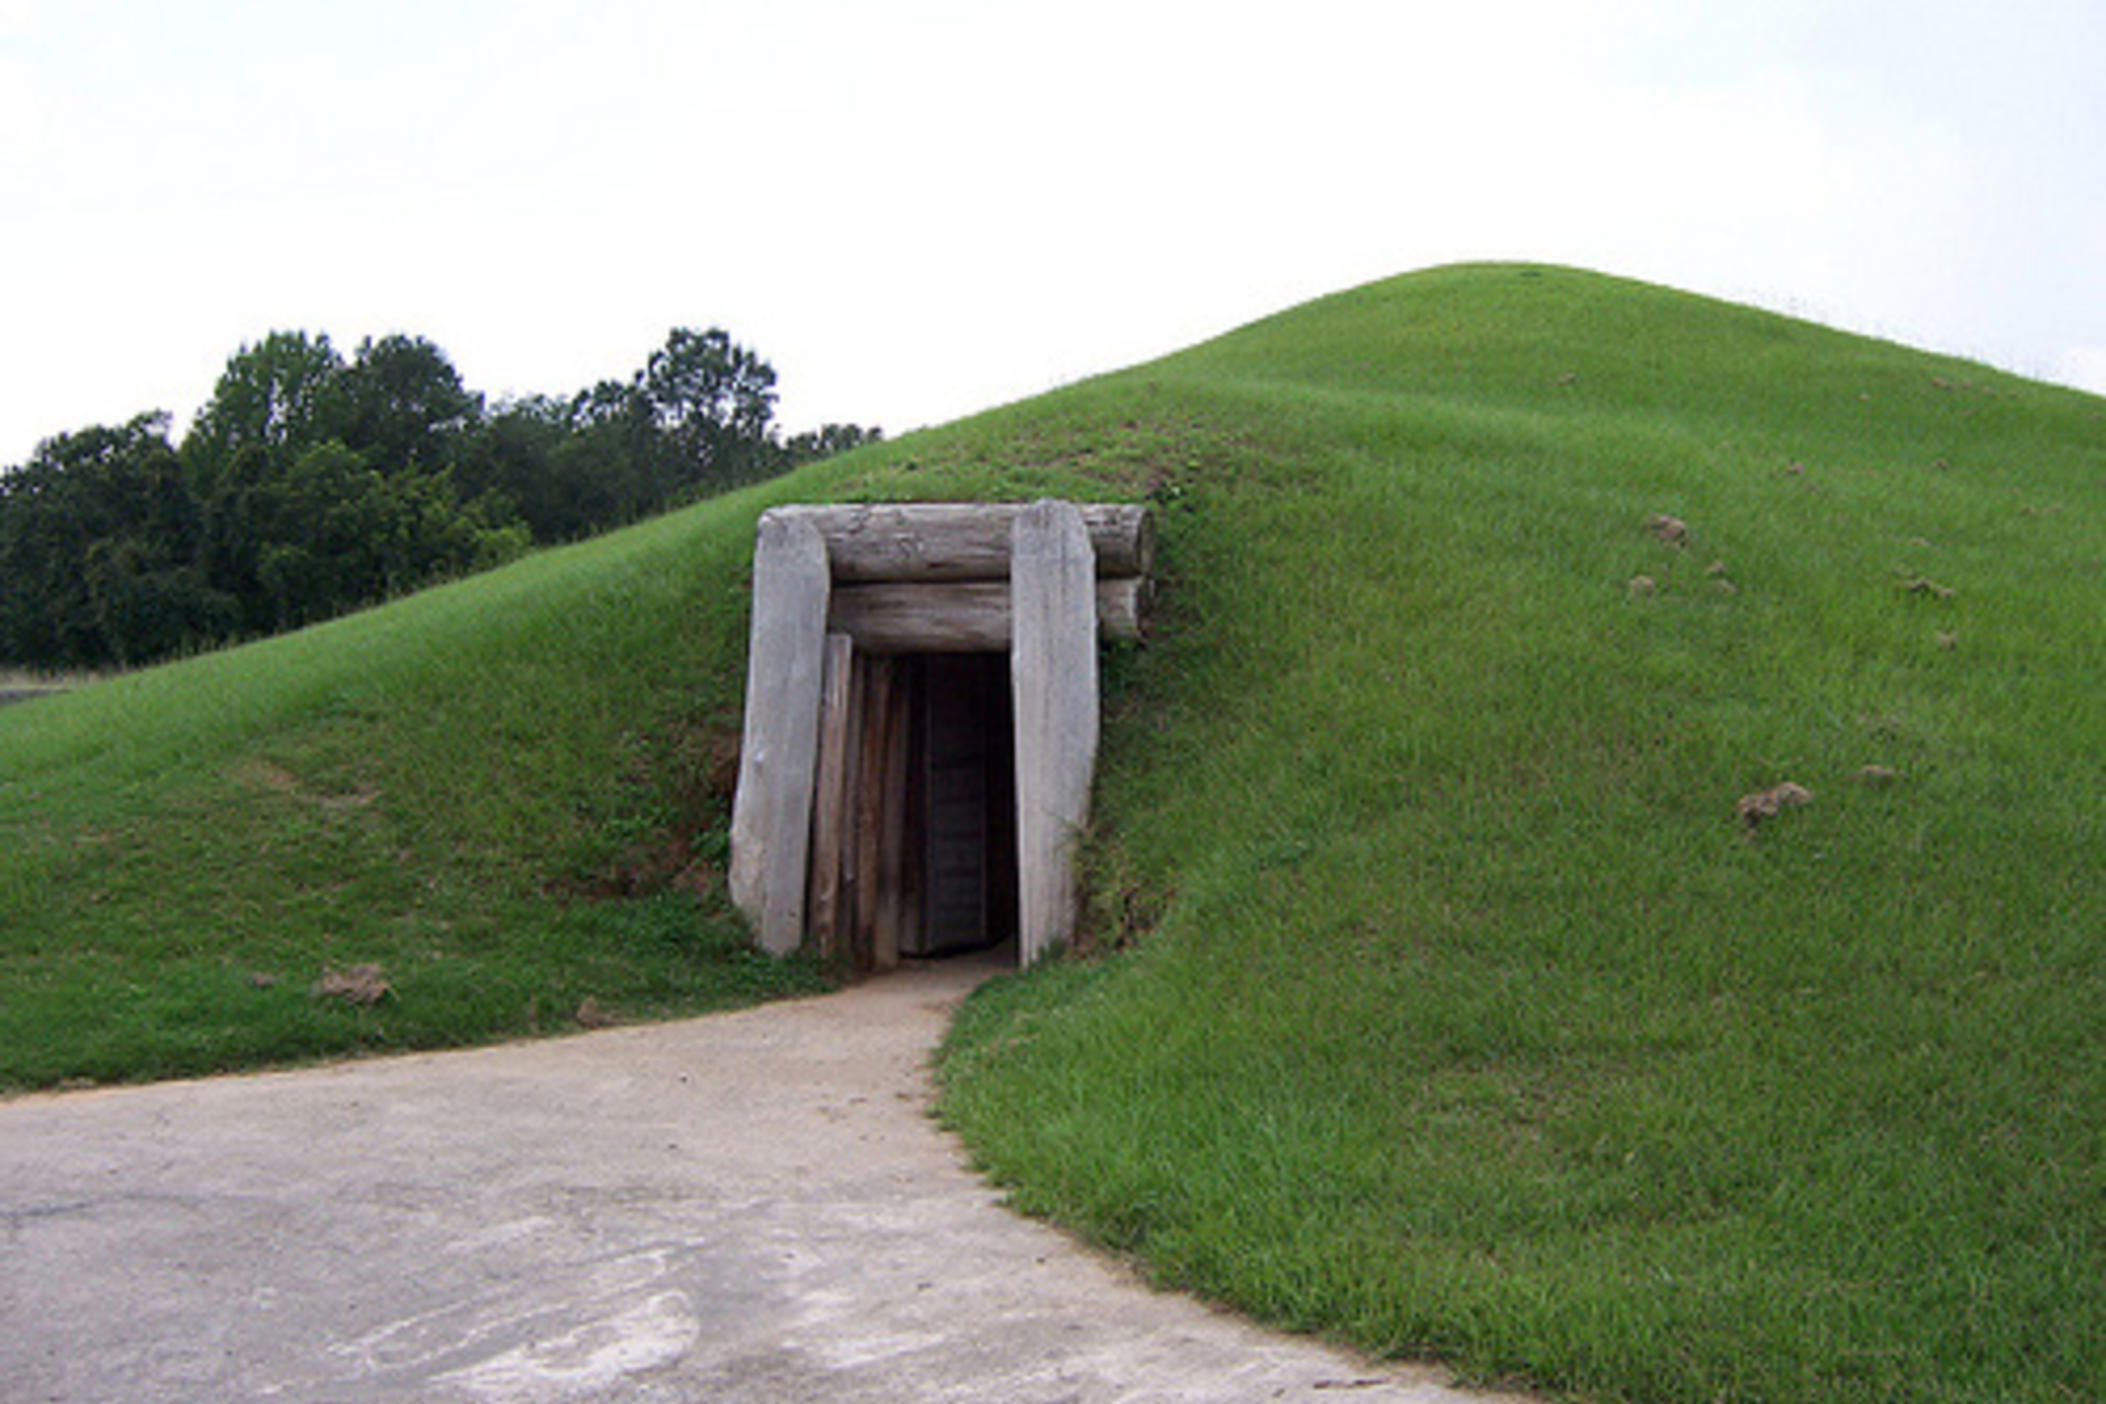 The Muskogean people built mounds there during the Mississippian Period, which began around 900 AD, for meeting, living, burial, and agricultural purposes. A bill seeks to upgrade the Ocmulgee Mounds national monument to a national park and preserve.